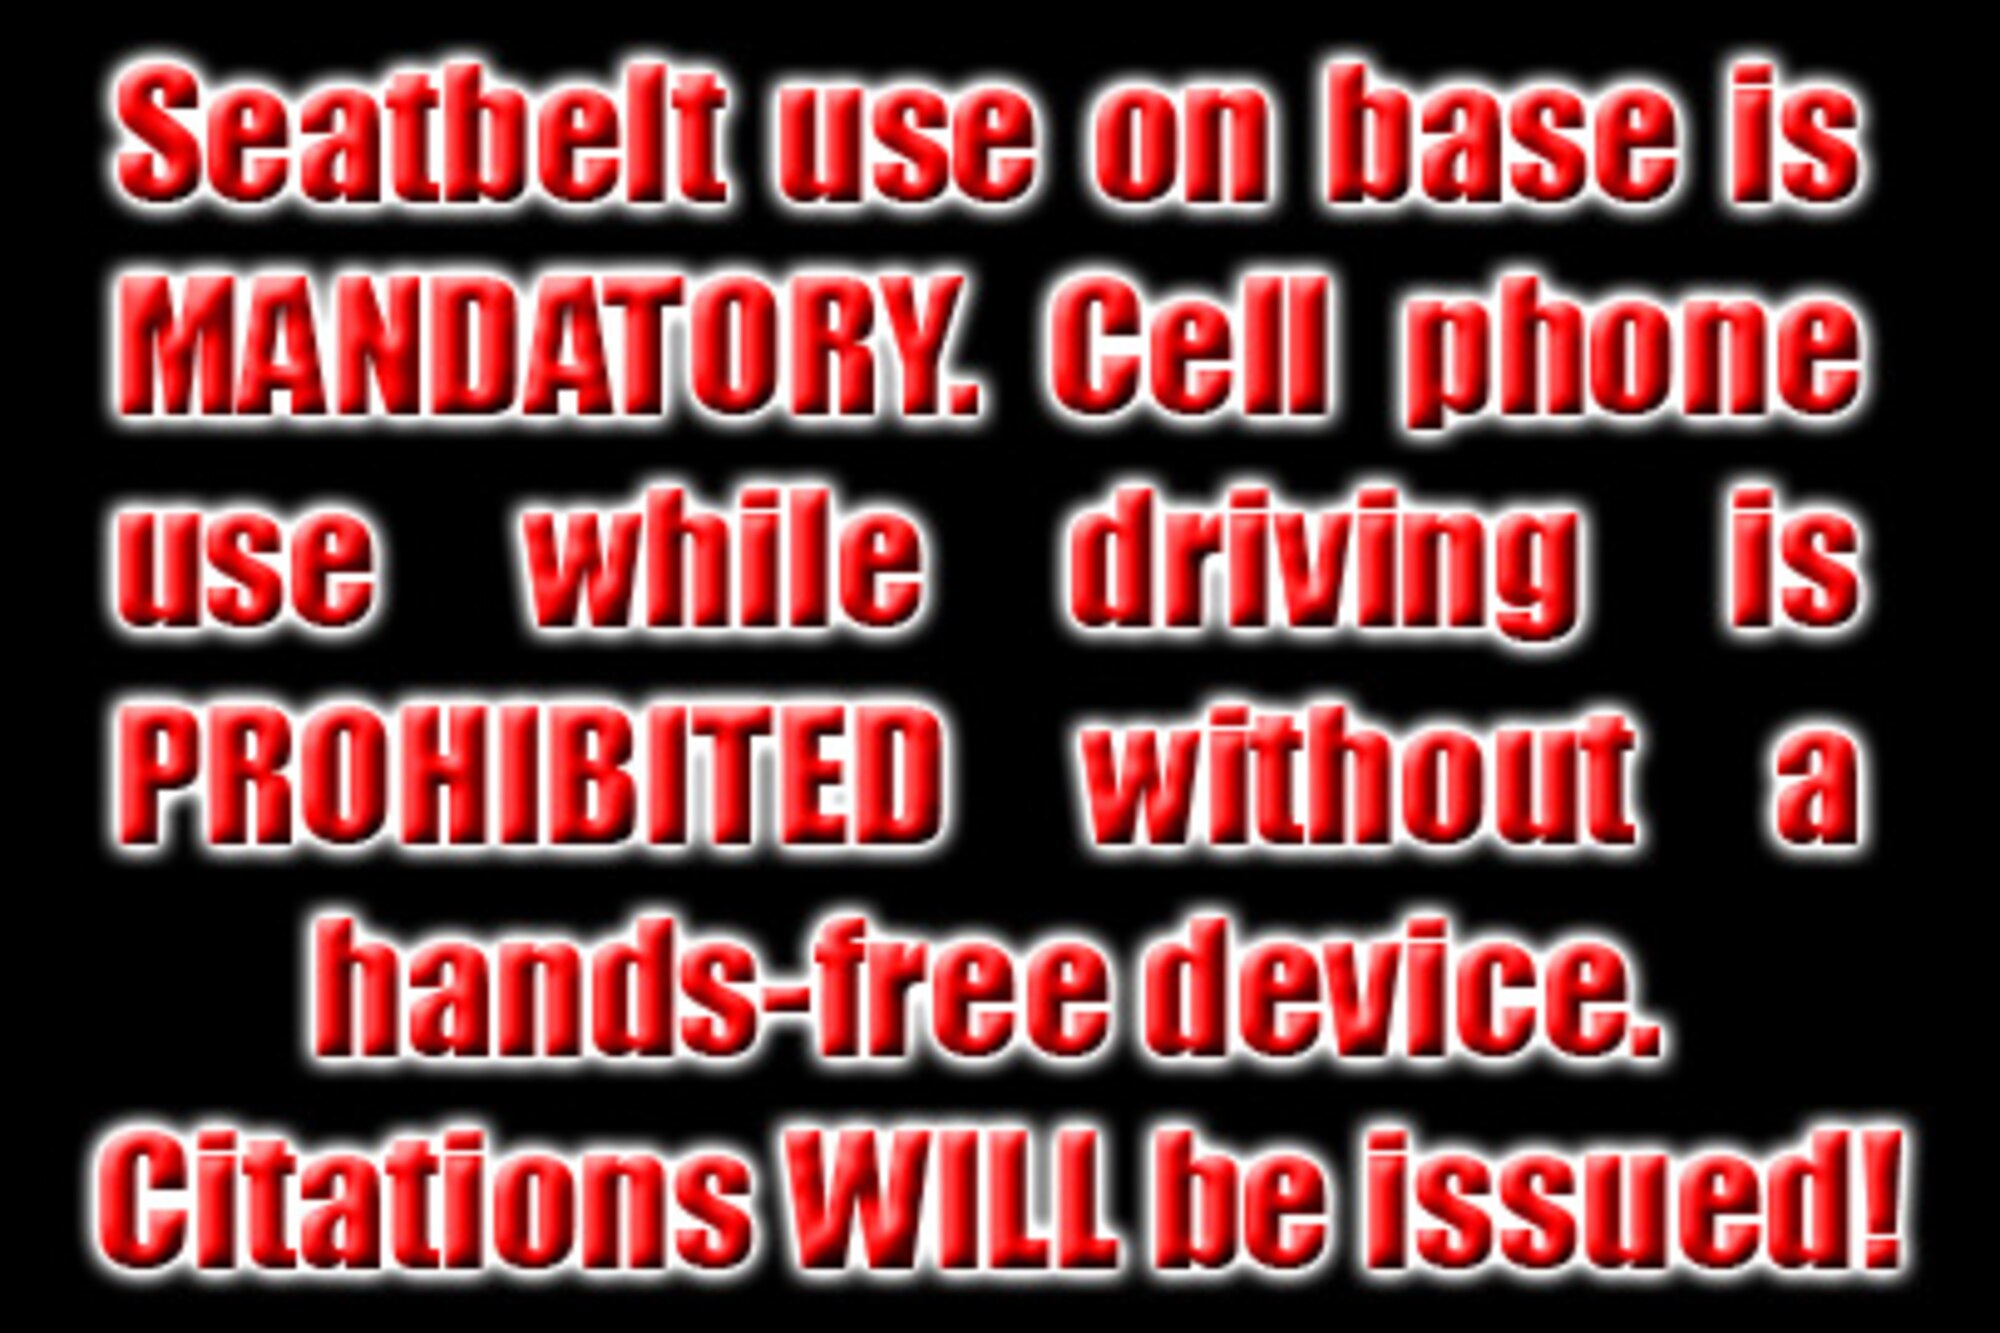 Seatbelt use is mandatory on base. Cell phone use, including texting, while driving without a hands-free device is prohibited. Citations will be issued. (U.S. Air Force graphic).